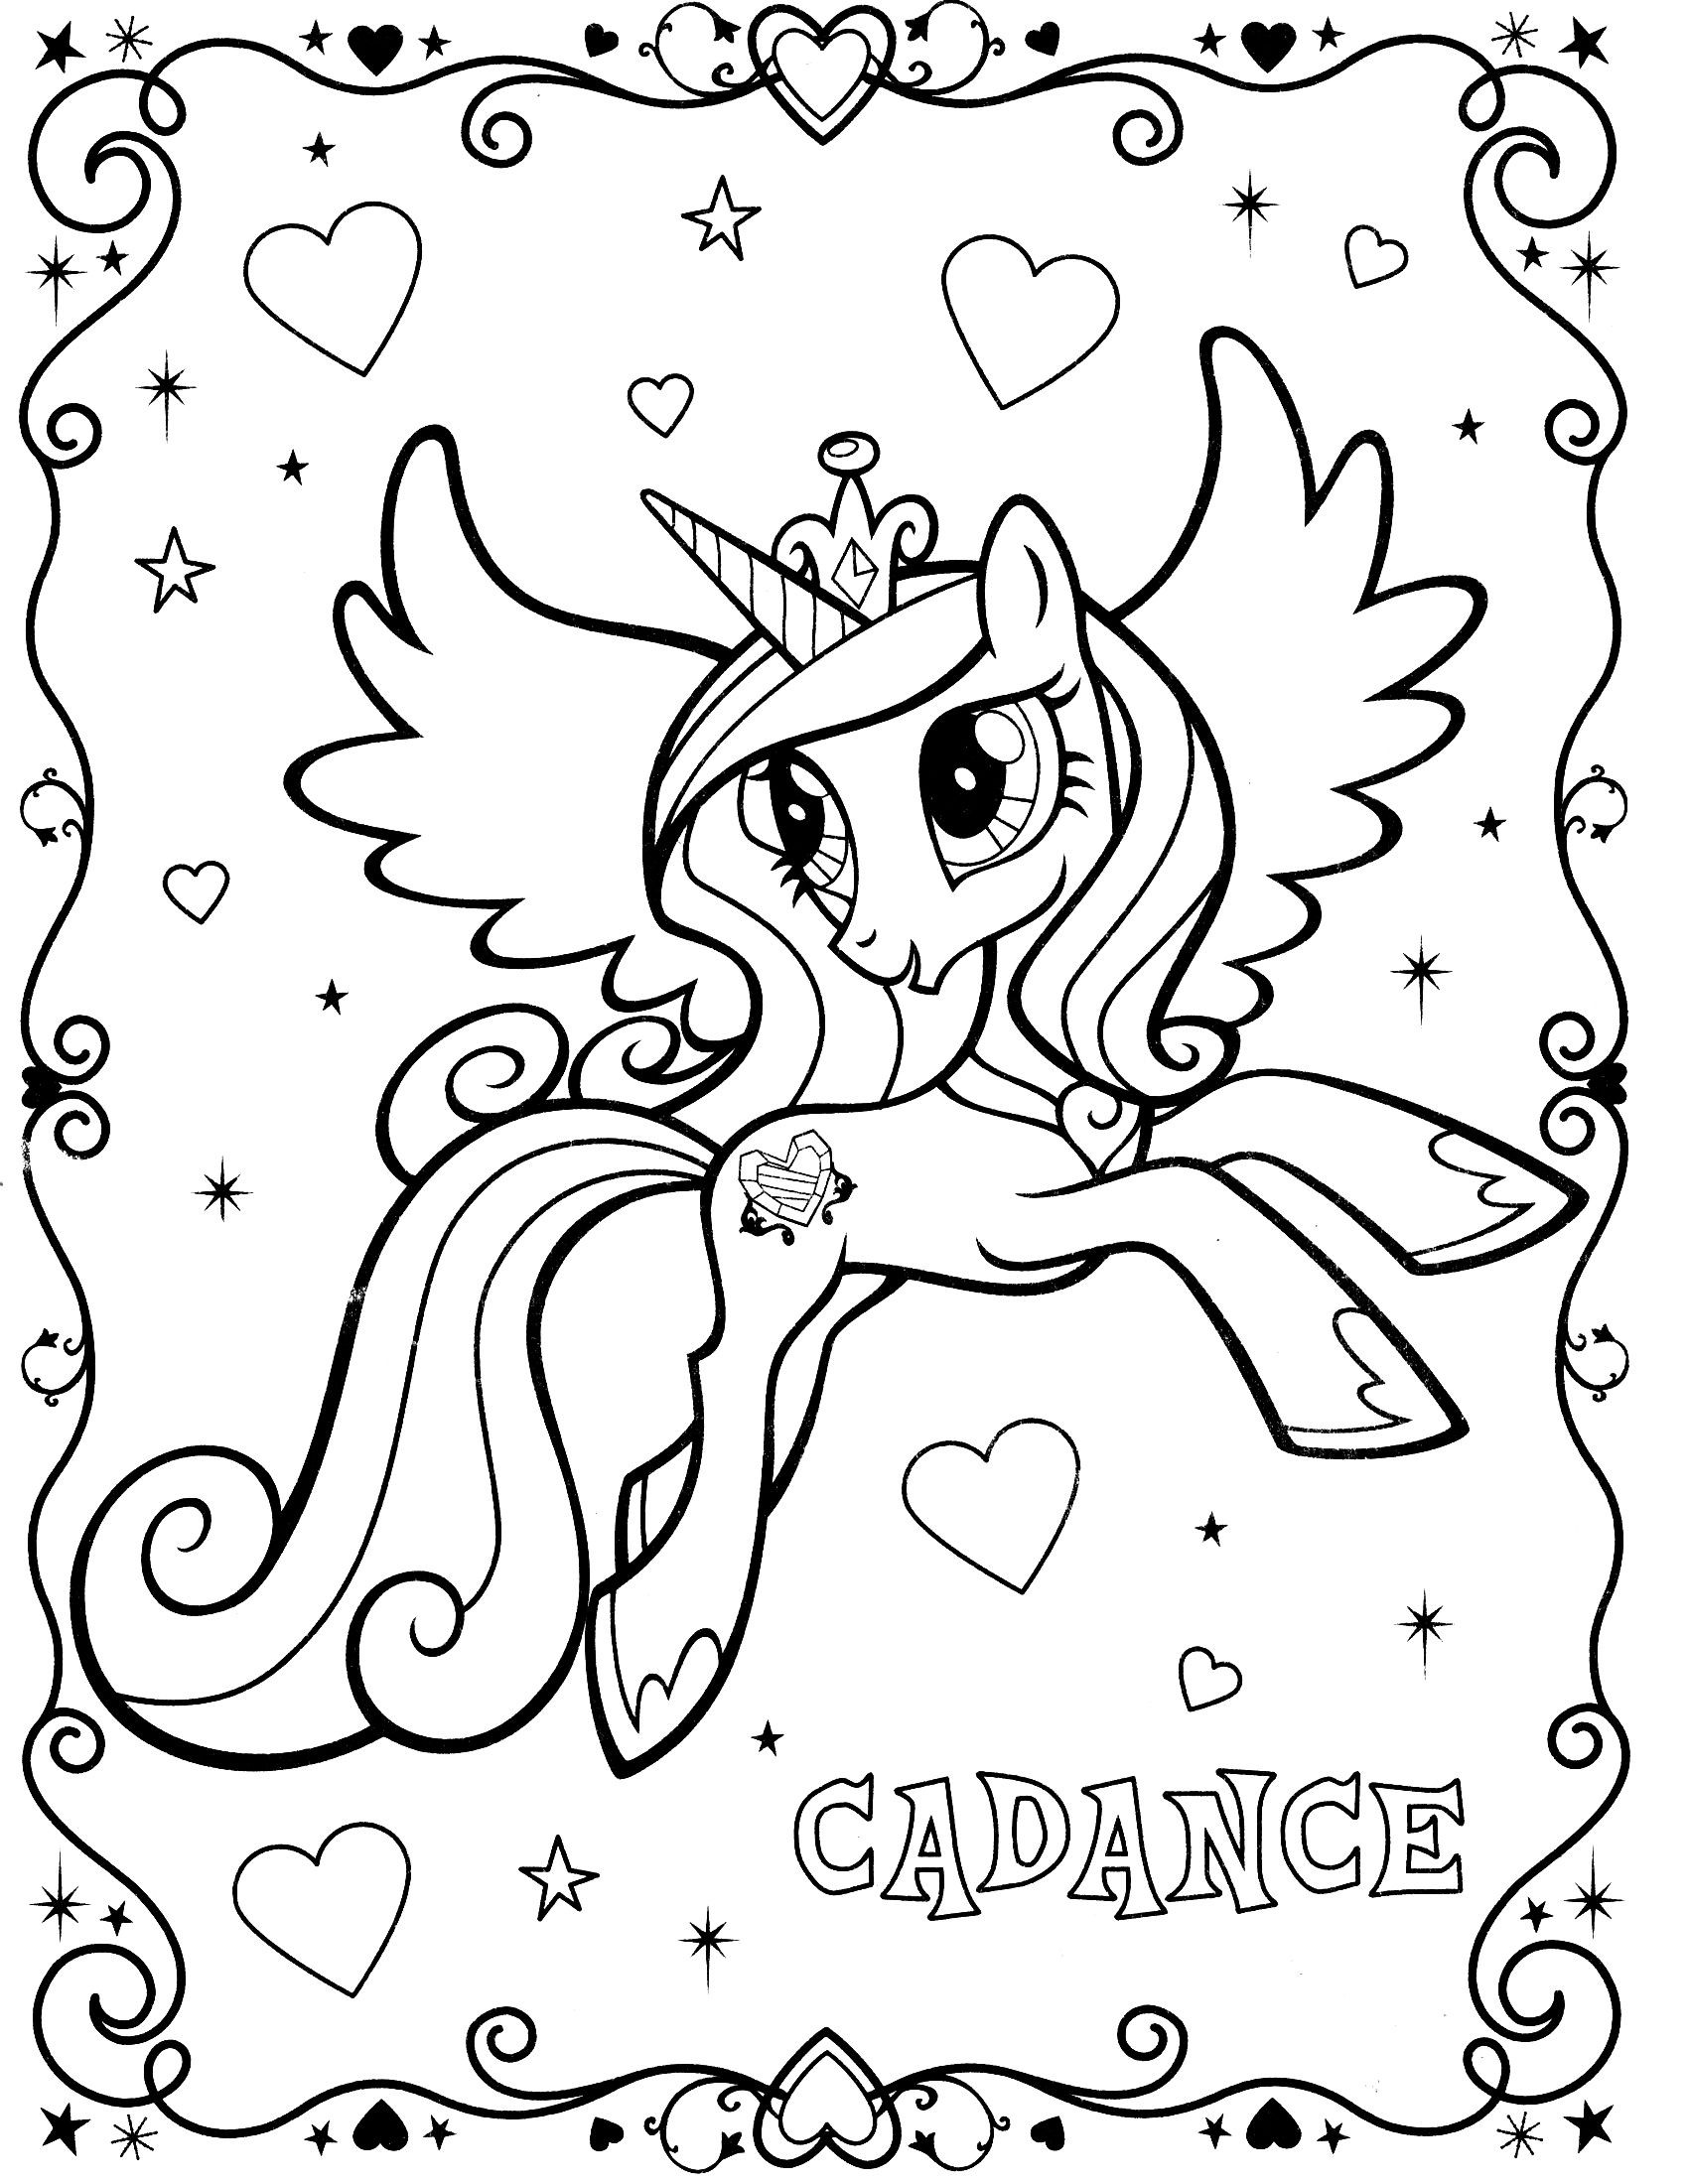 plicolor my little pony coloring page Printable pages and Coloring books for grown ups at unicorn colouring